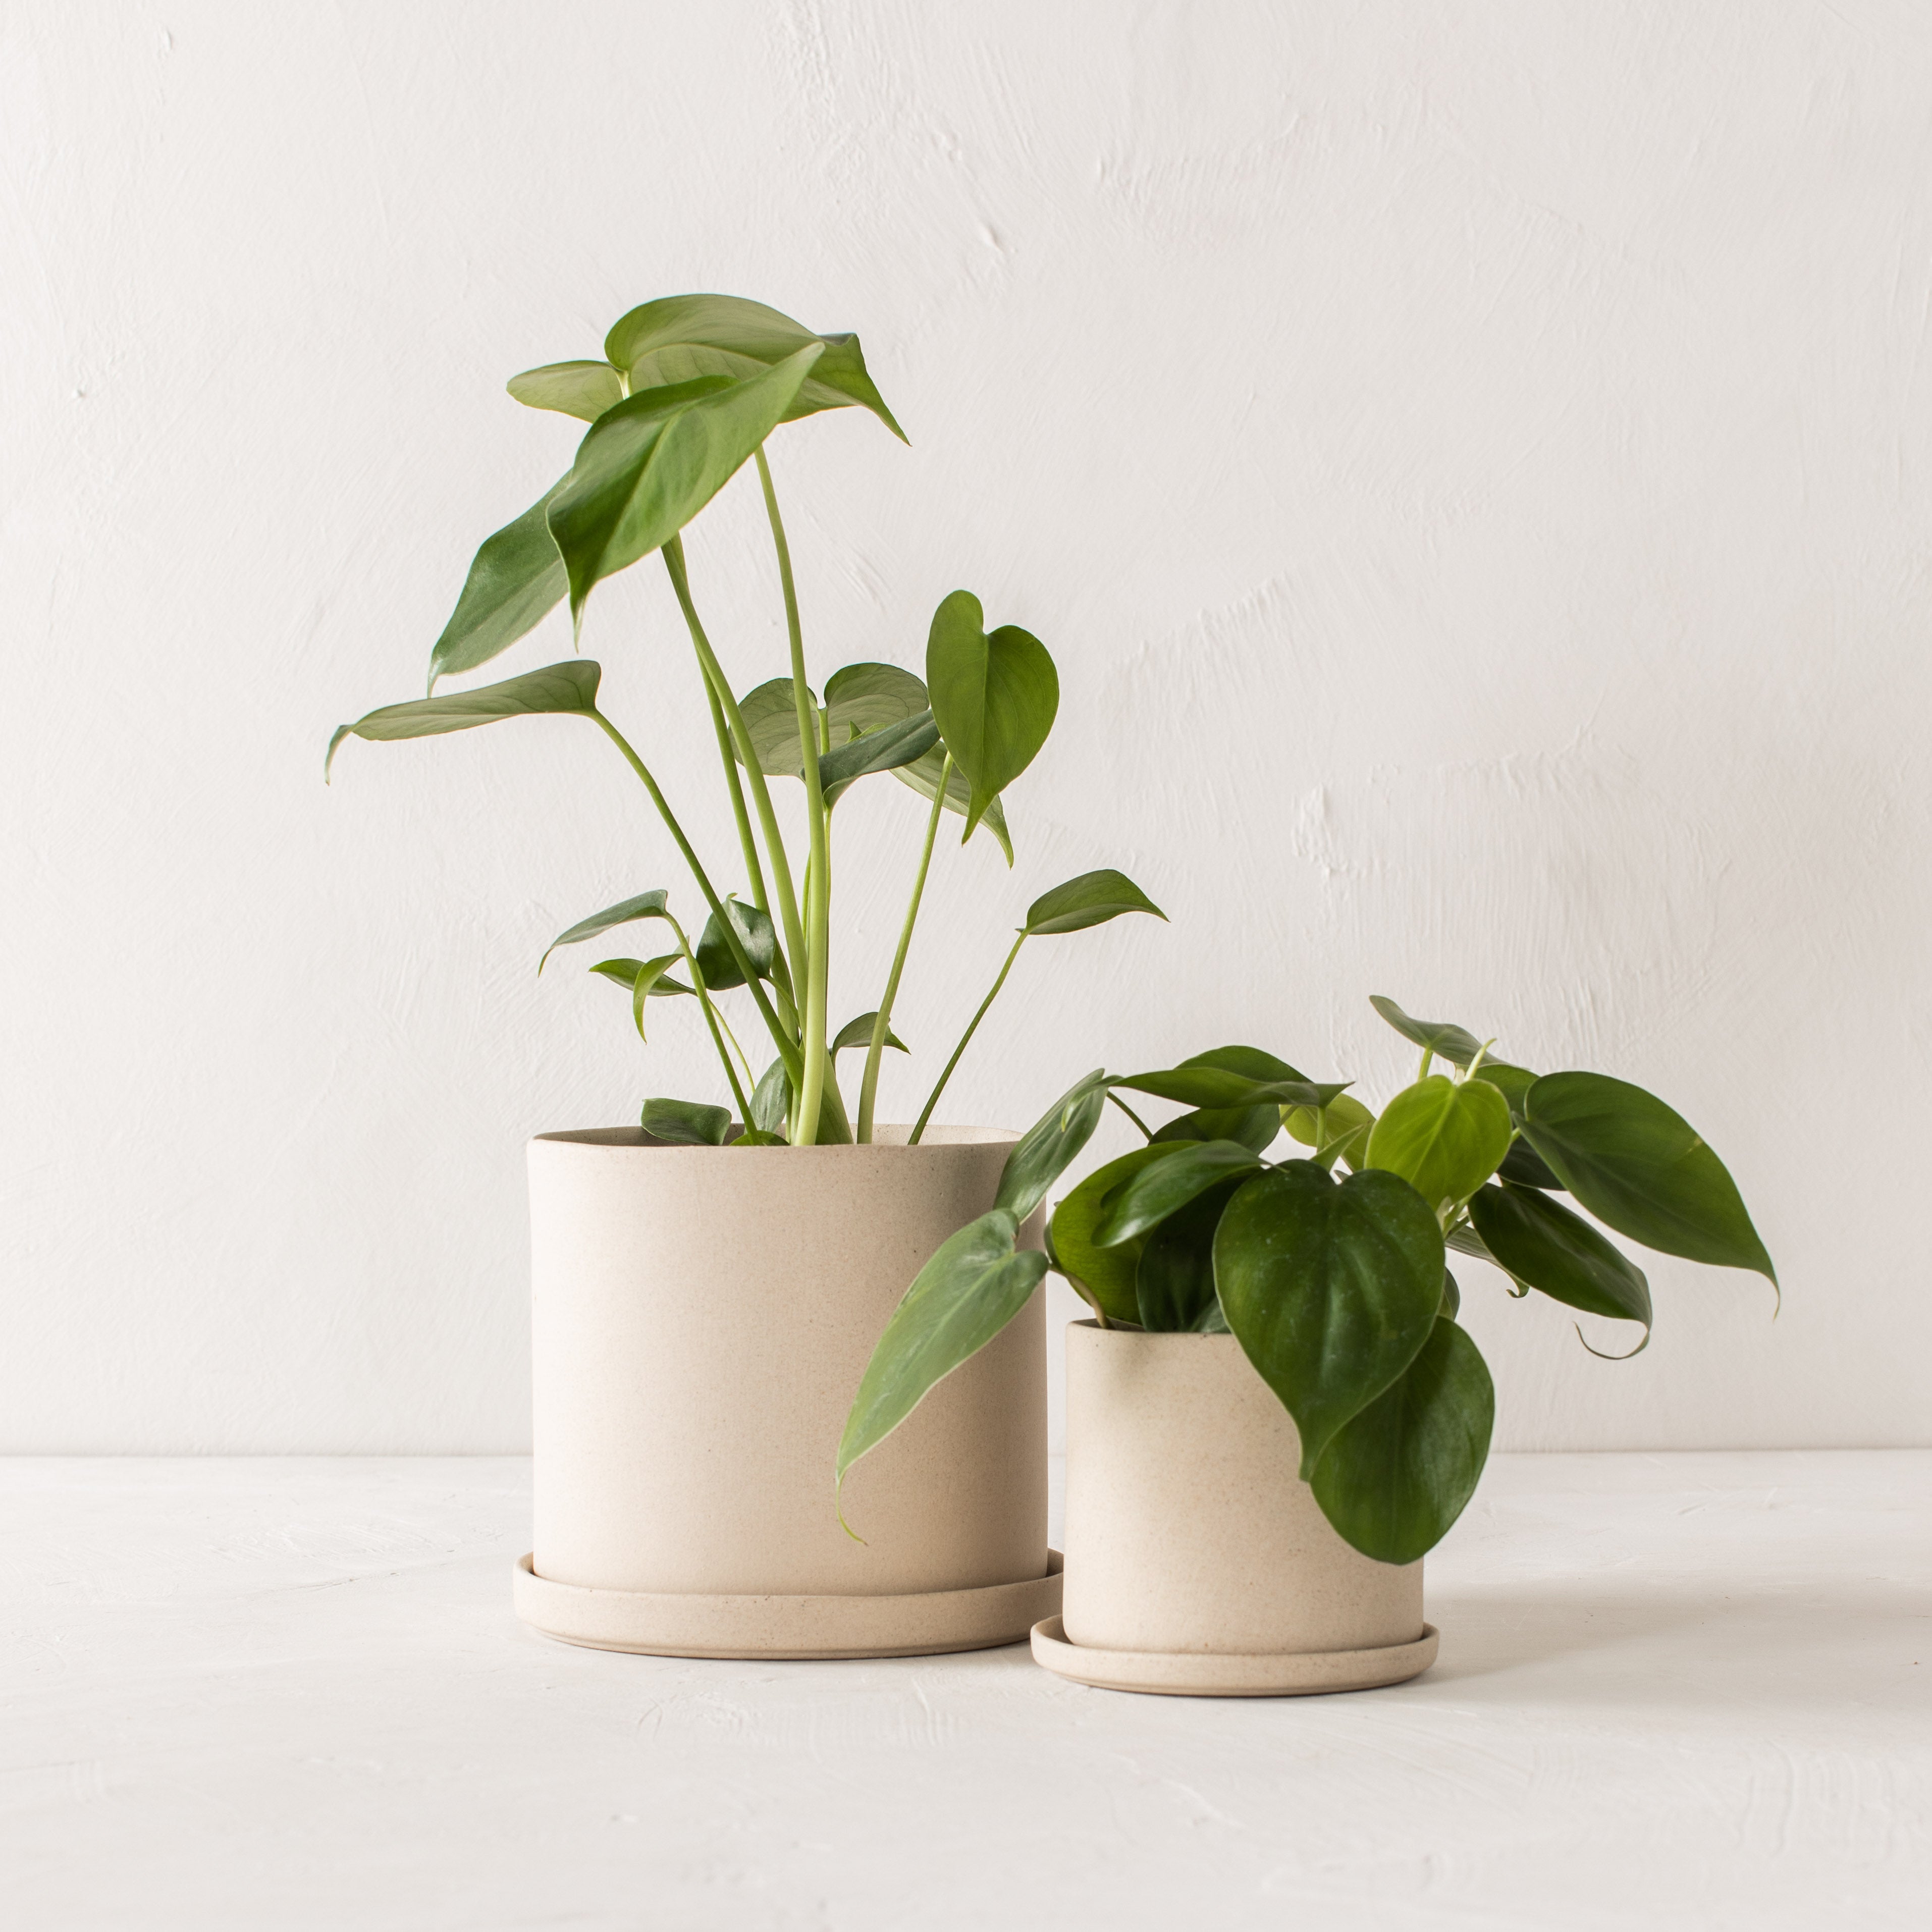 Two minimal stoneware ceramic planters side by side. Both with drainage bottom dishes. From left to right; six inch planter with monstera plant inside, 4 inch stoneware planter. Handmade stonware planters designed and sold by Convivial Production, Kansas City ceramics. 